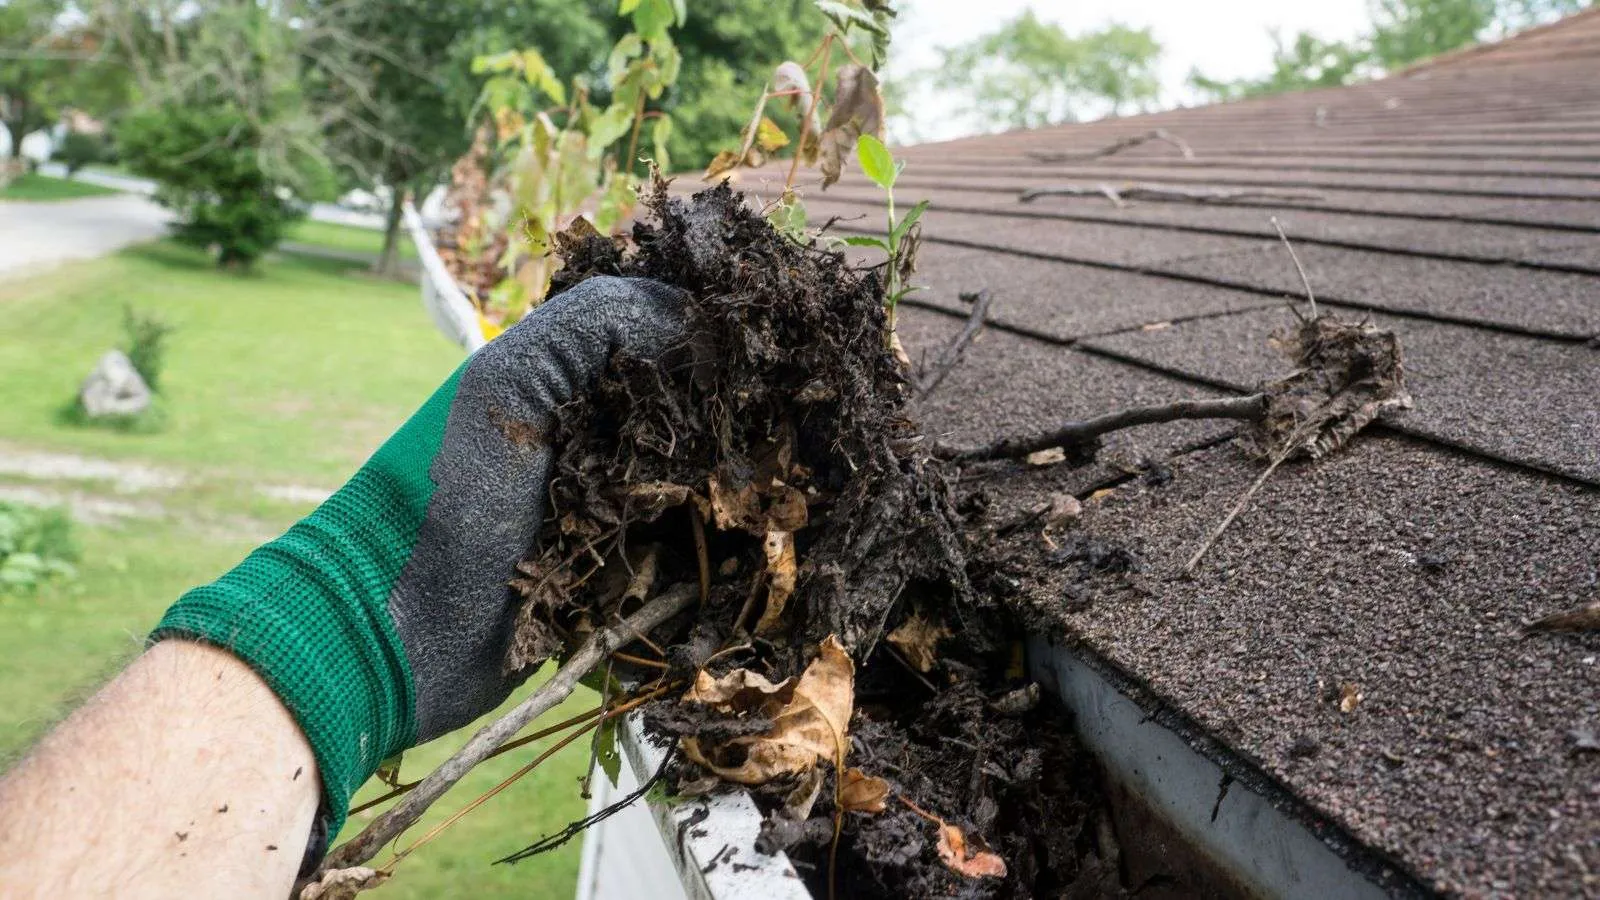 can gutter cleaning prevent roof damage - bighomeprojects.com